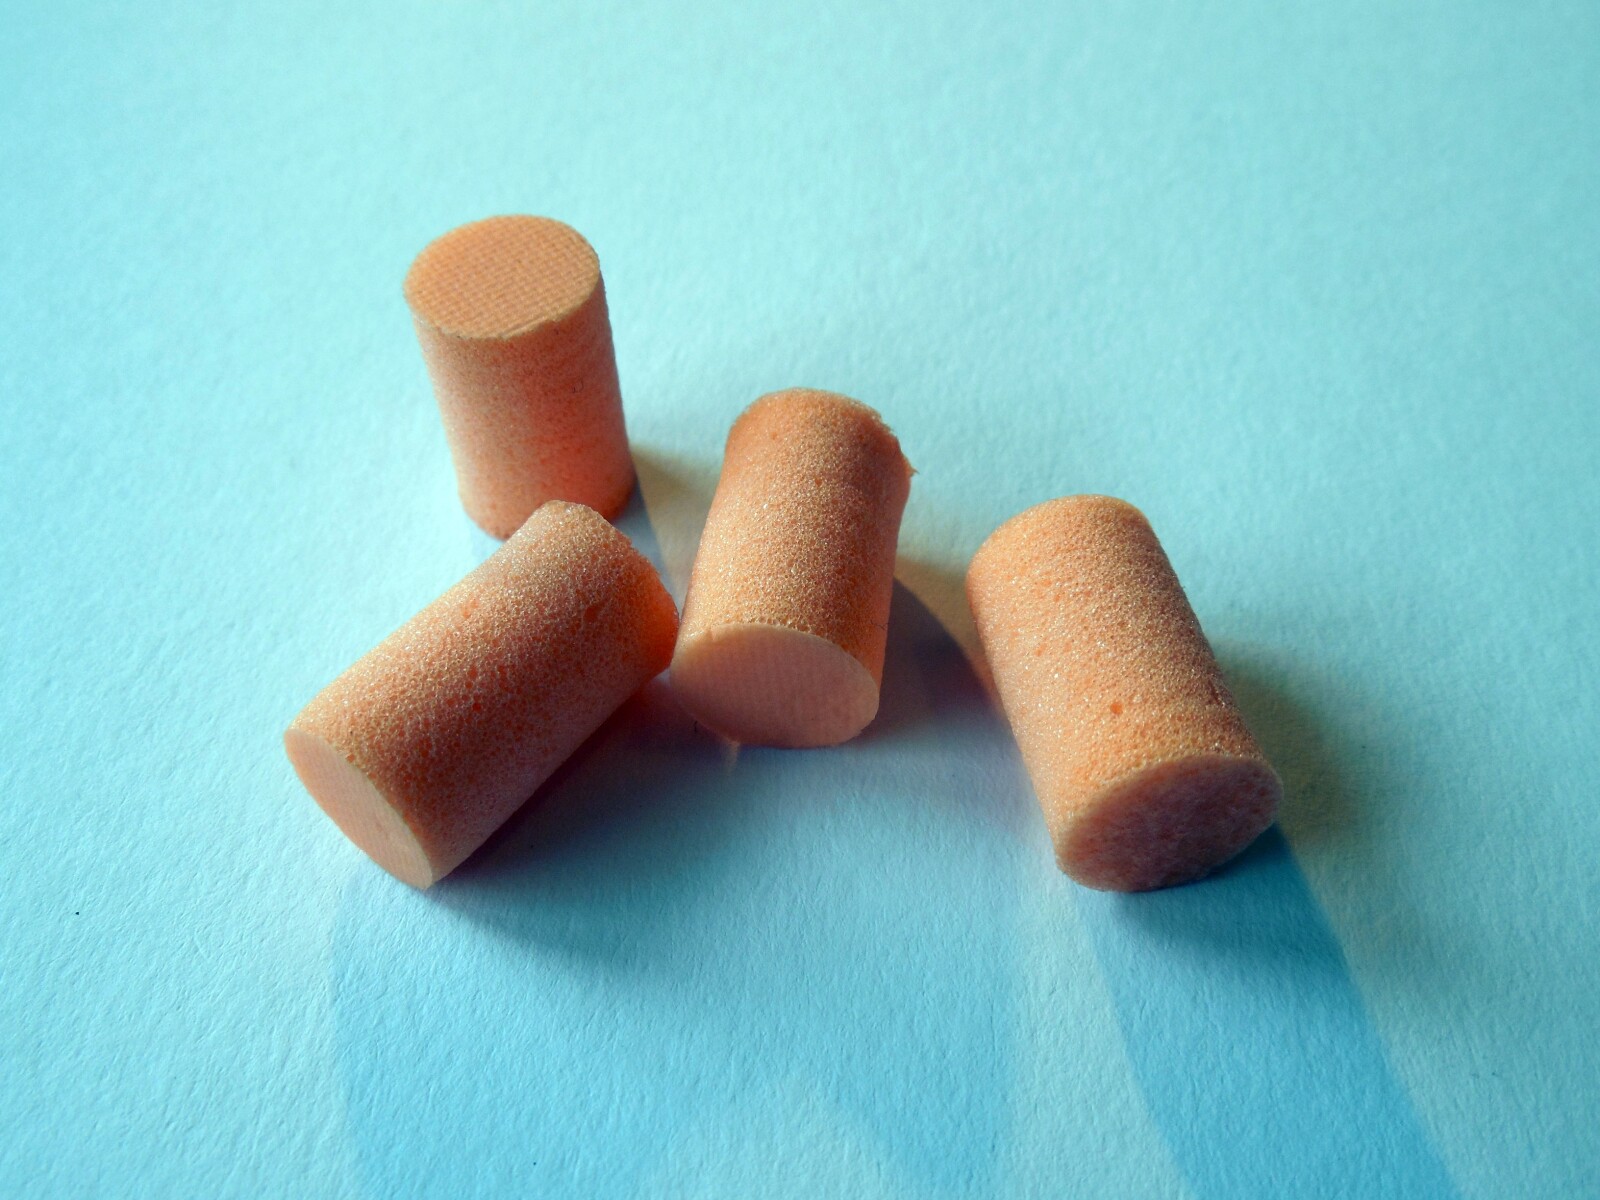 The 3M Earplug Lawsuits - What You Should Know